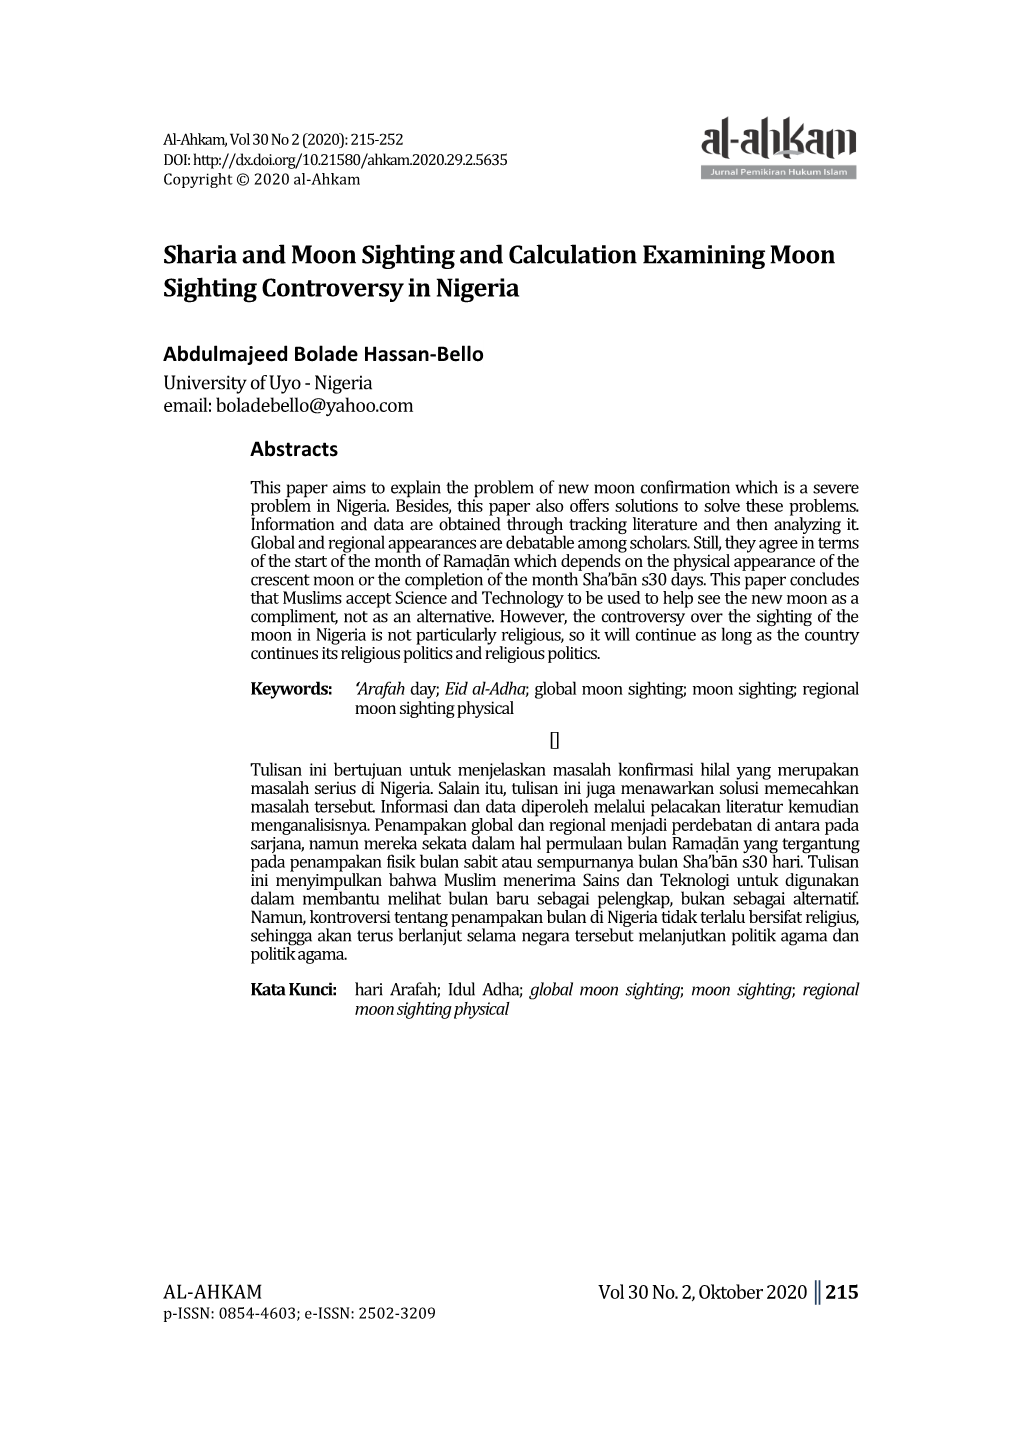 Sharia and Moon Sighting and Calculation Examining Moon Sighting Controversy in Nigeria